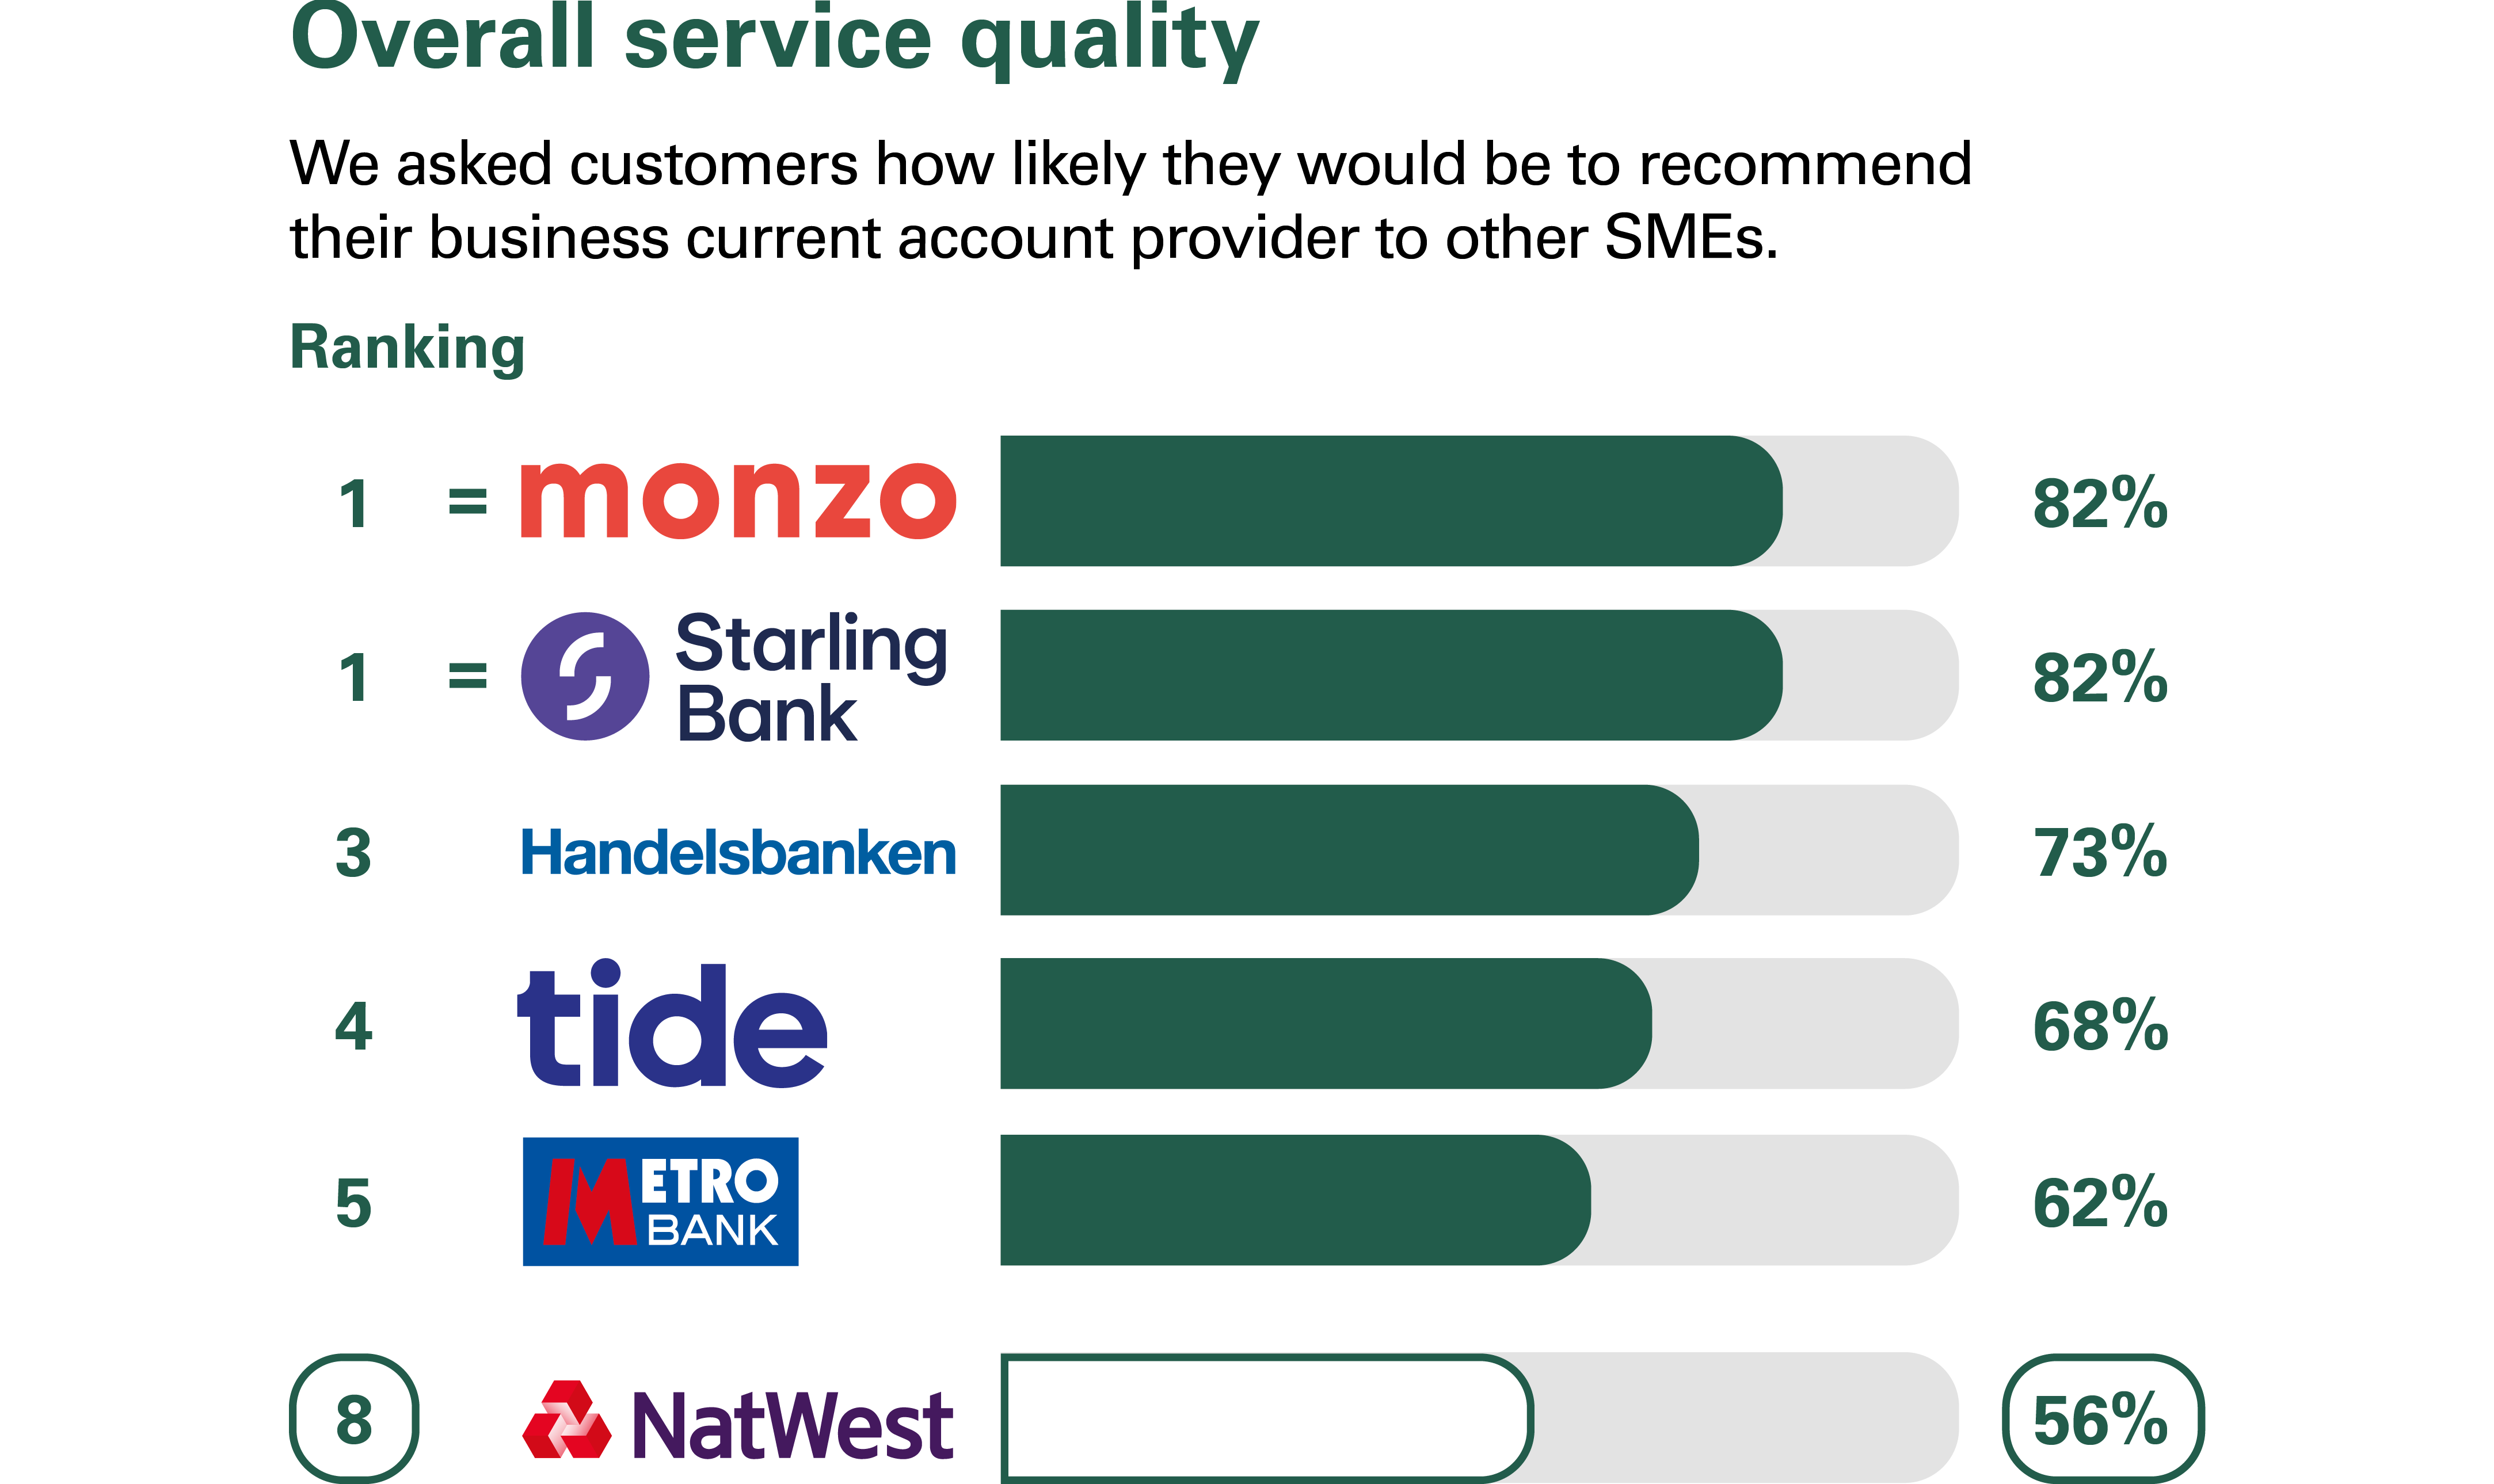 Overall service quality results